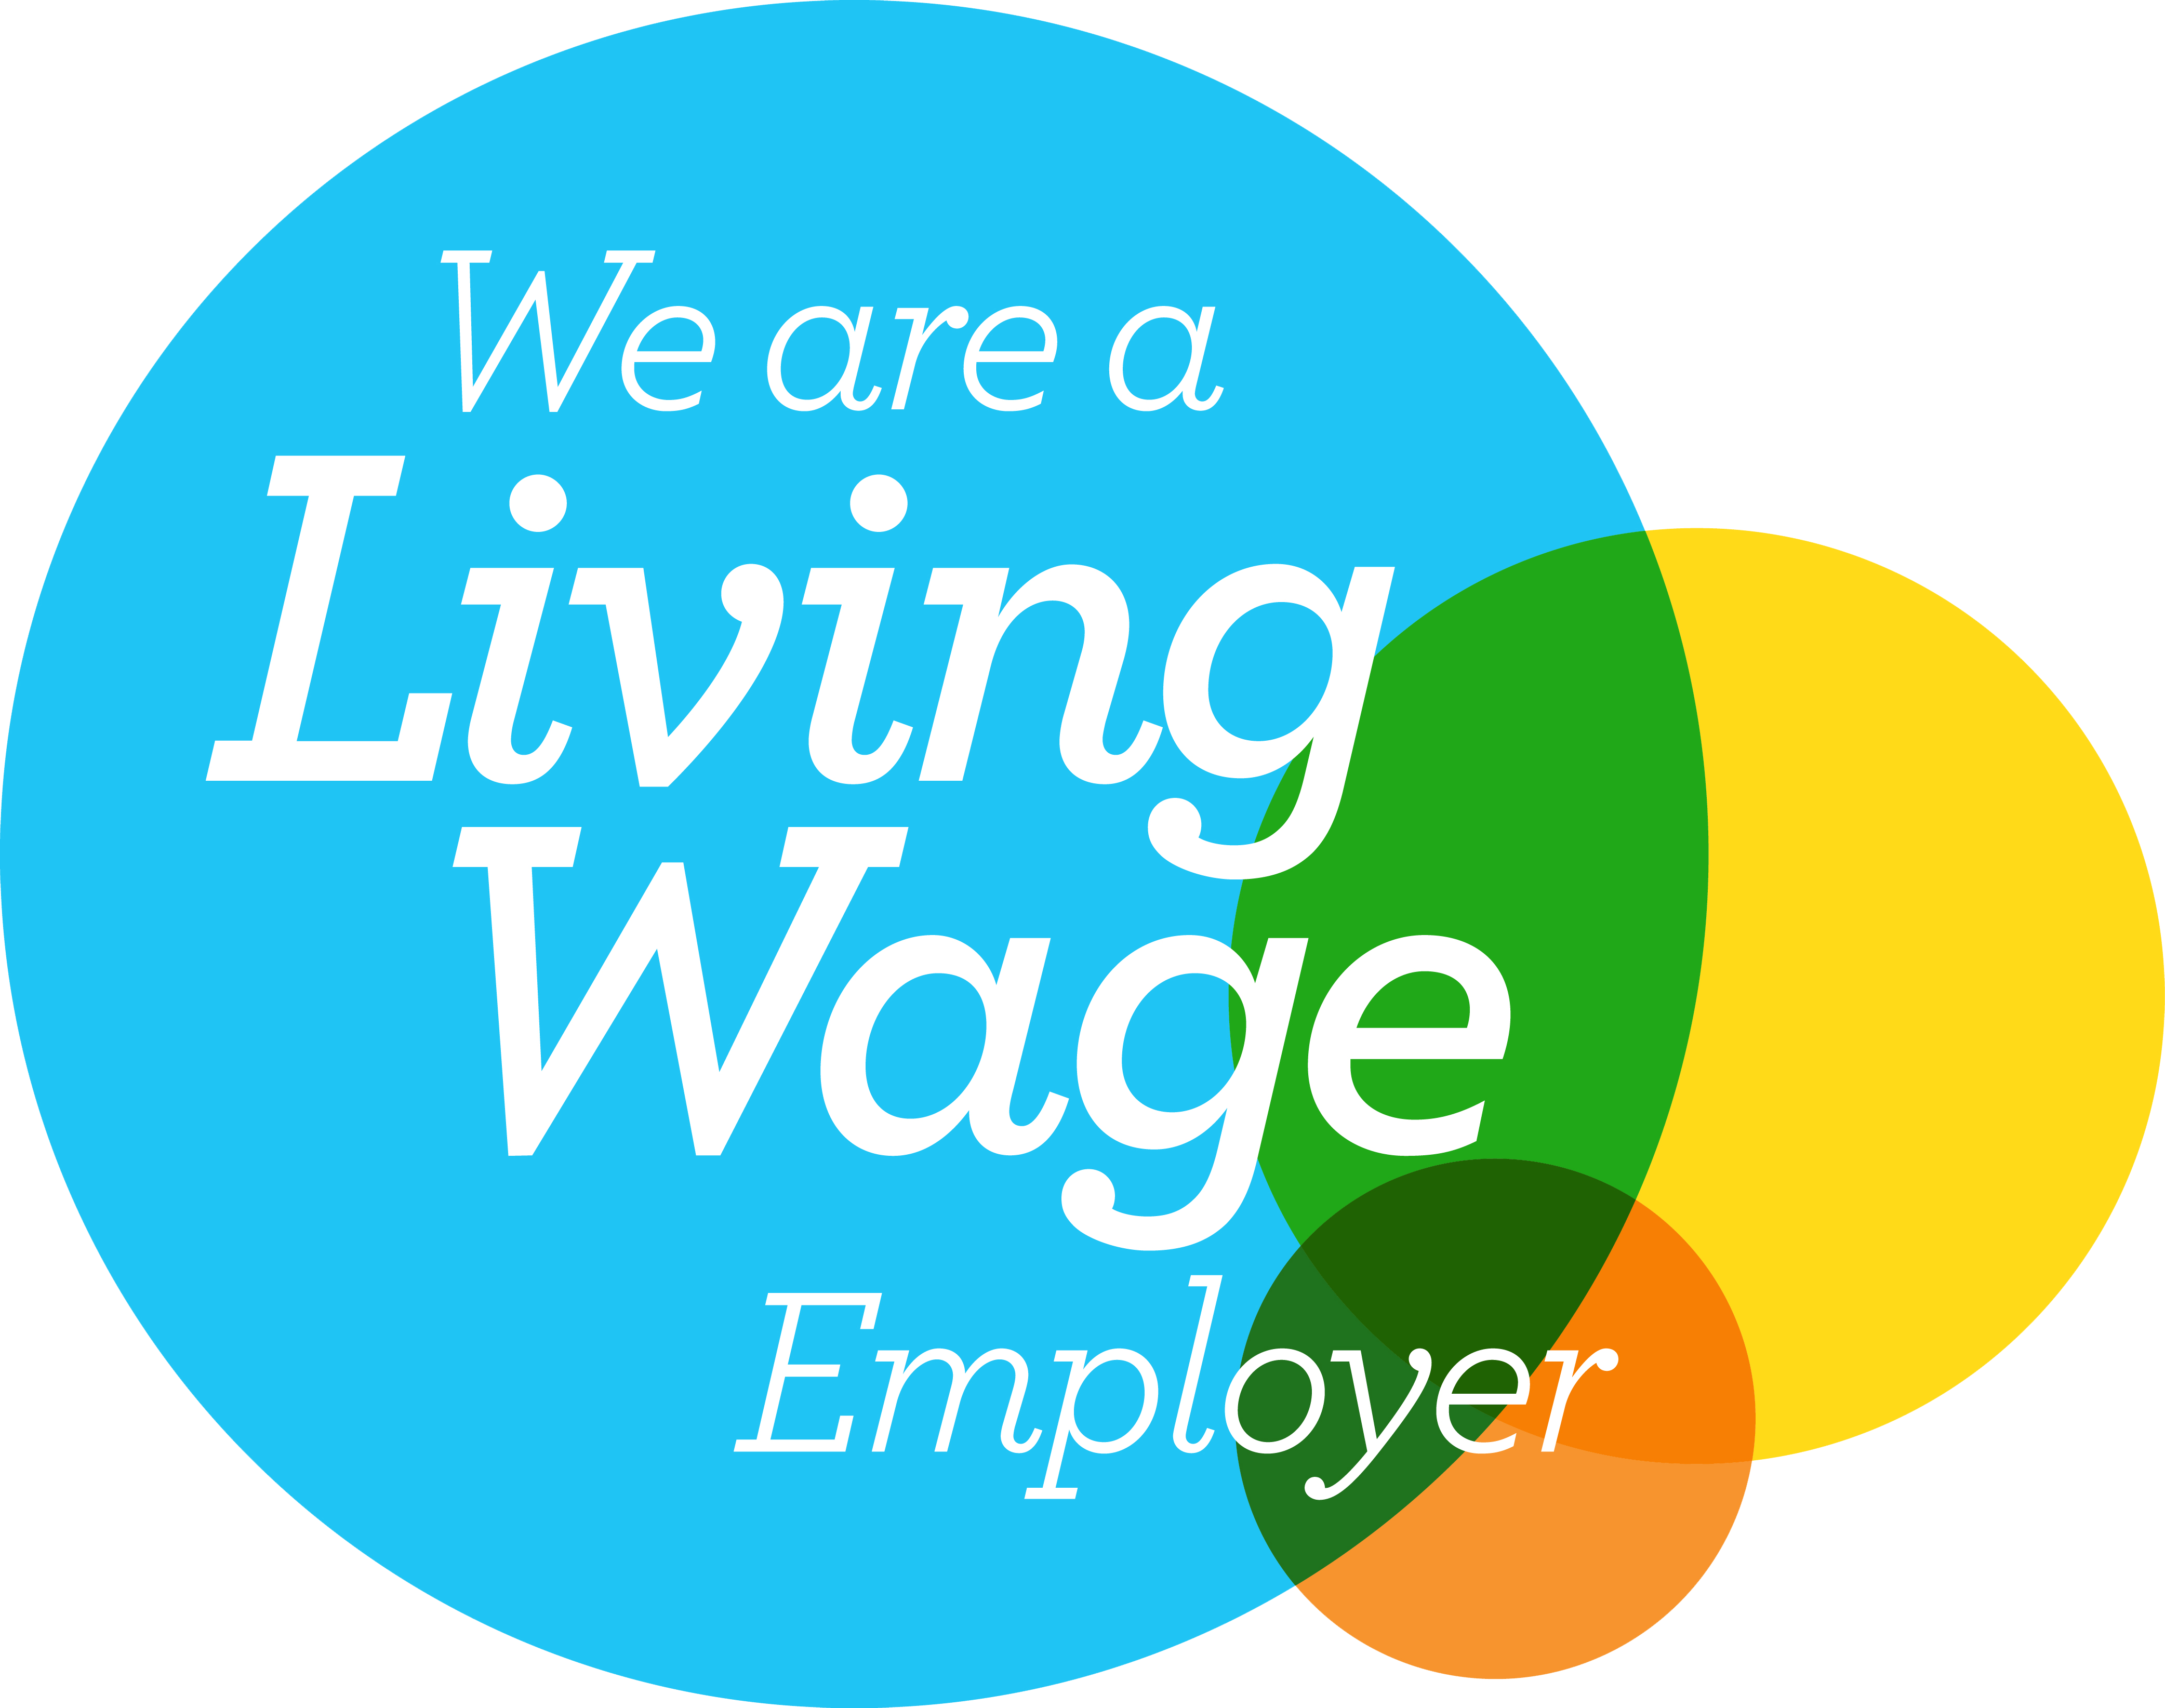 Festive Lights are a Living Wage Employer